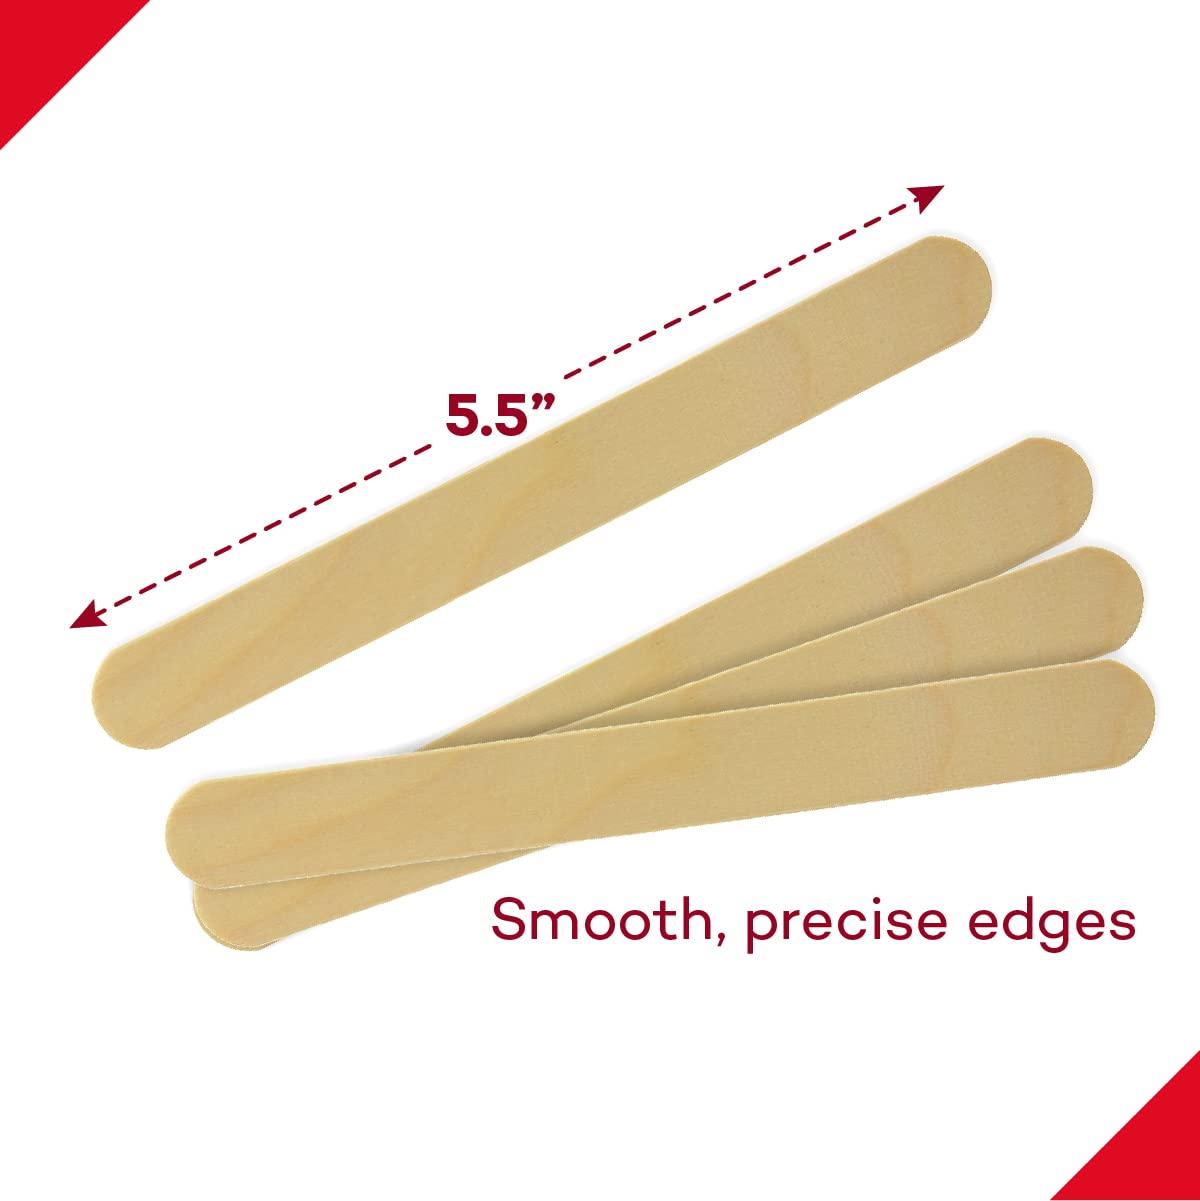 Dealmed 5.5 Junior Tongue Depressors 500 Non-Sterile Wood Tongue Depressor  Sticks Can Be Used as Tongue Depressors for Crafts in Medical Practice  Emergency First Aid Kits and More 5.5 Inch (Pack of